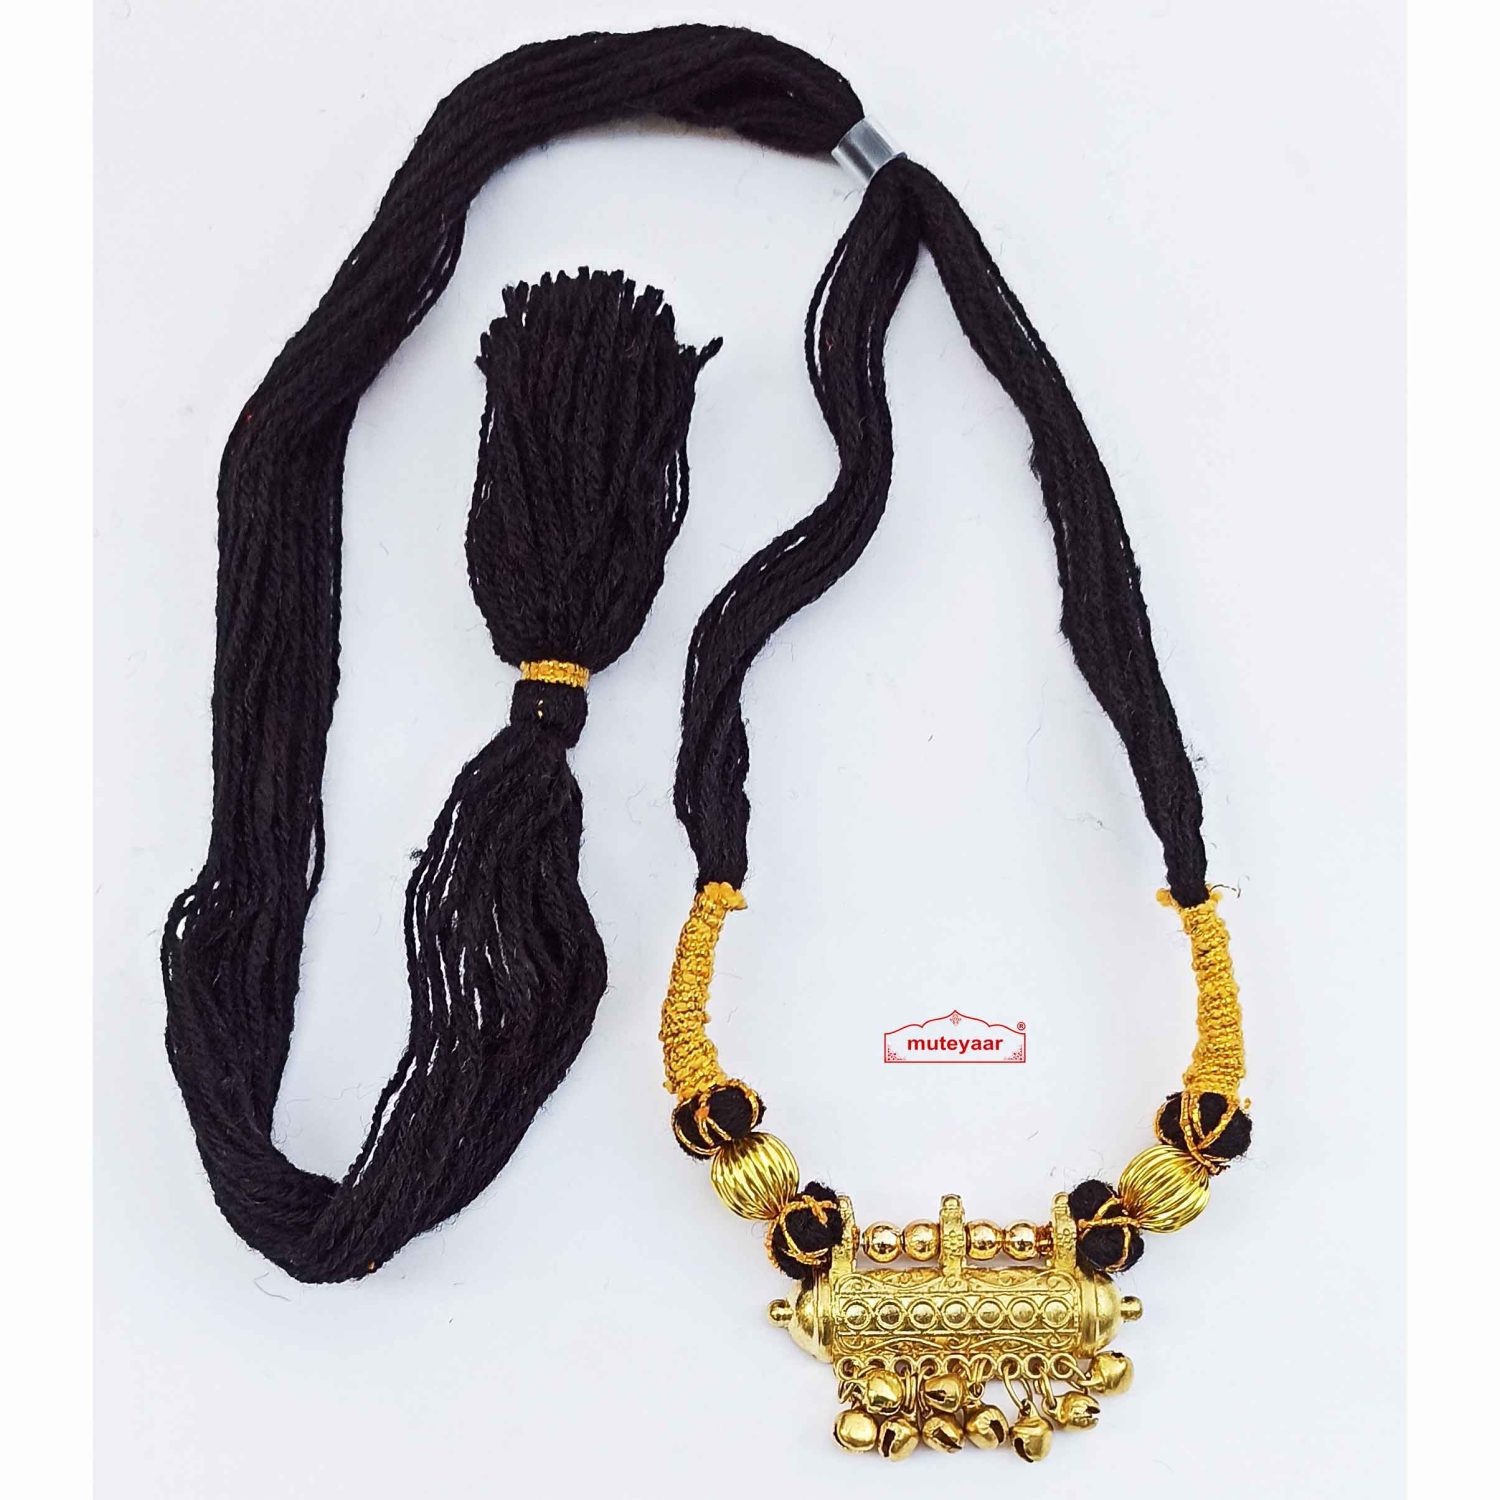 New Jugni Necklace for Giddha Bhangra